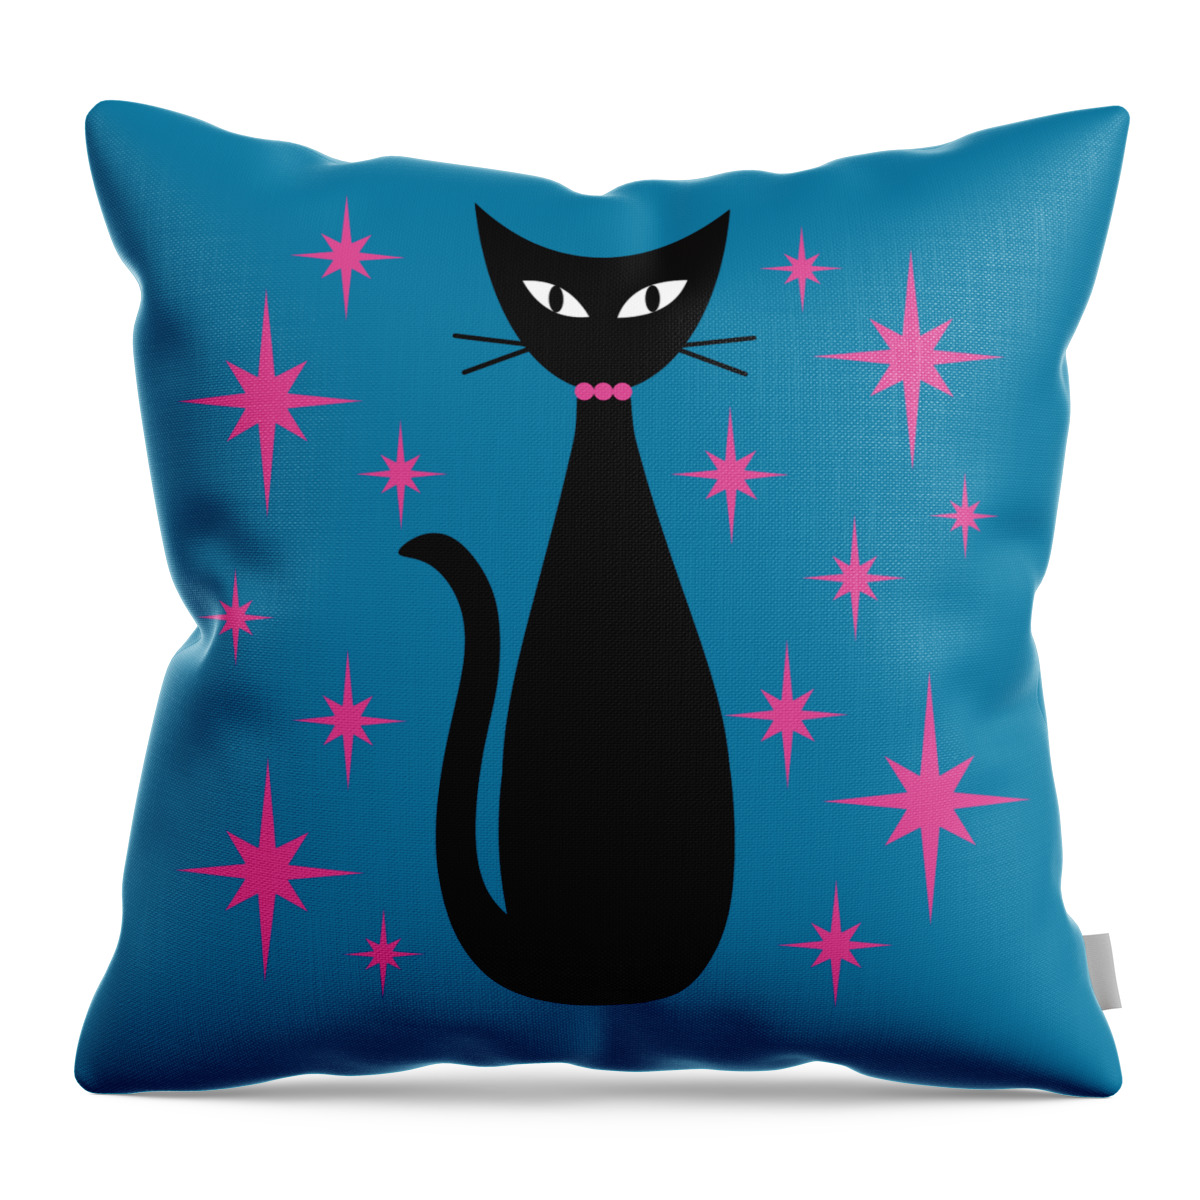 Mid Century Modern Throw Pillow featuring the digital art Mid Century Cat with Pink Starbursts by Donna Mibus